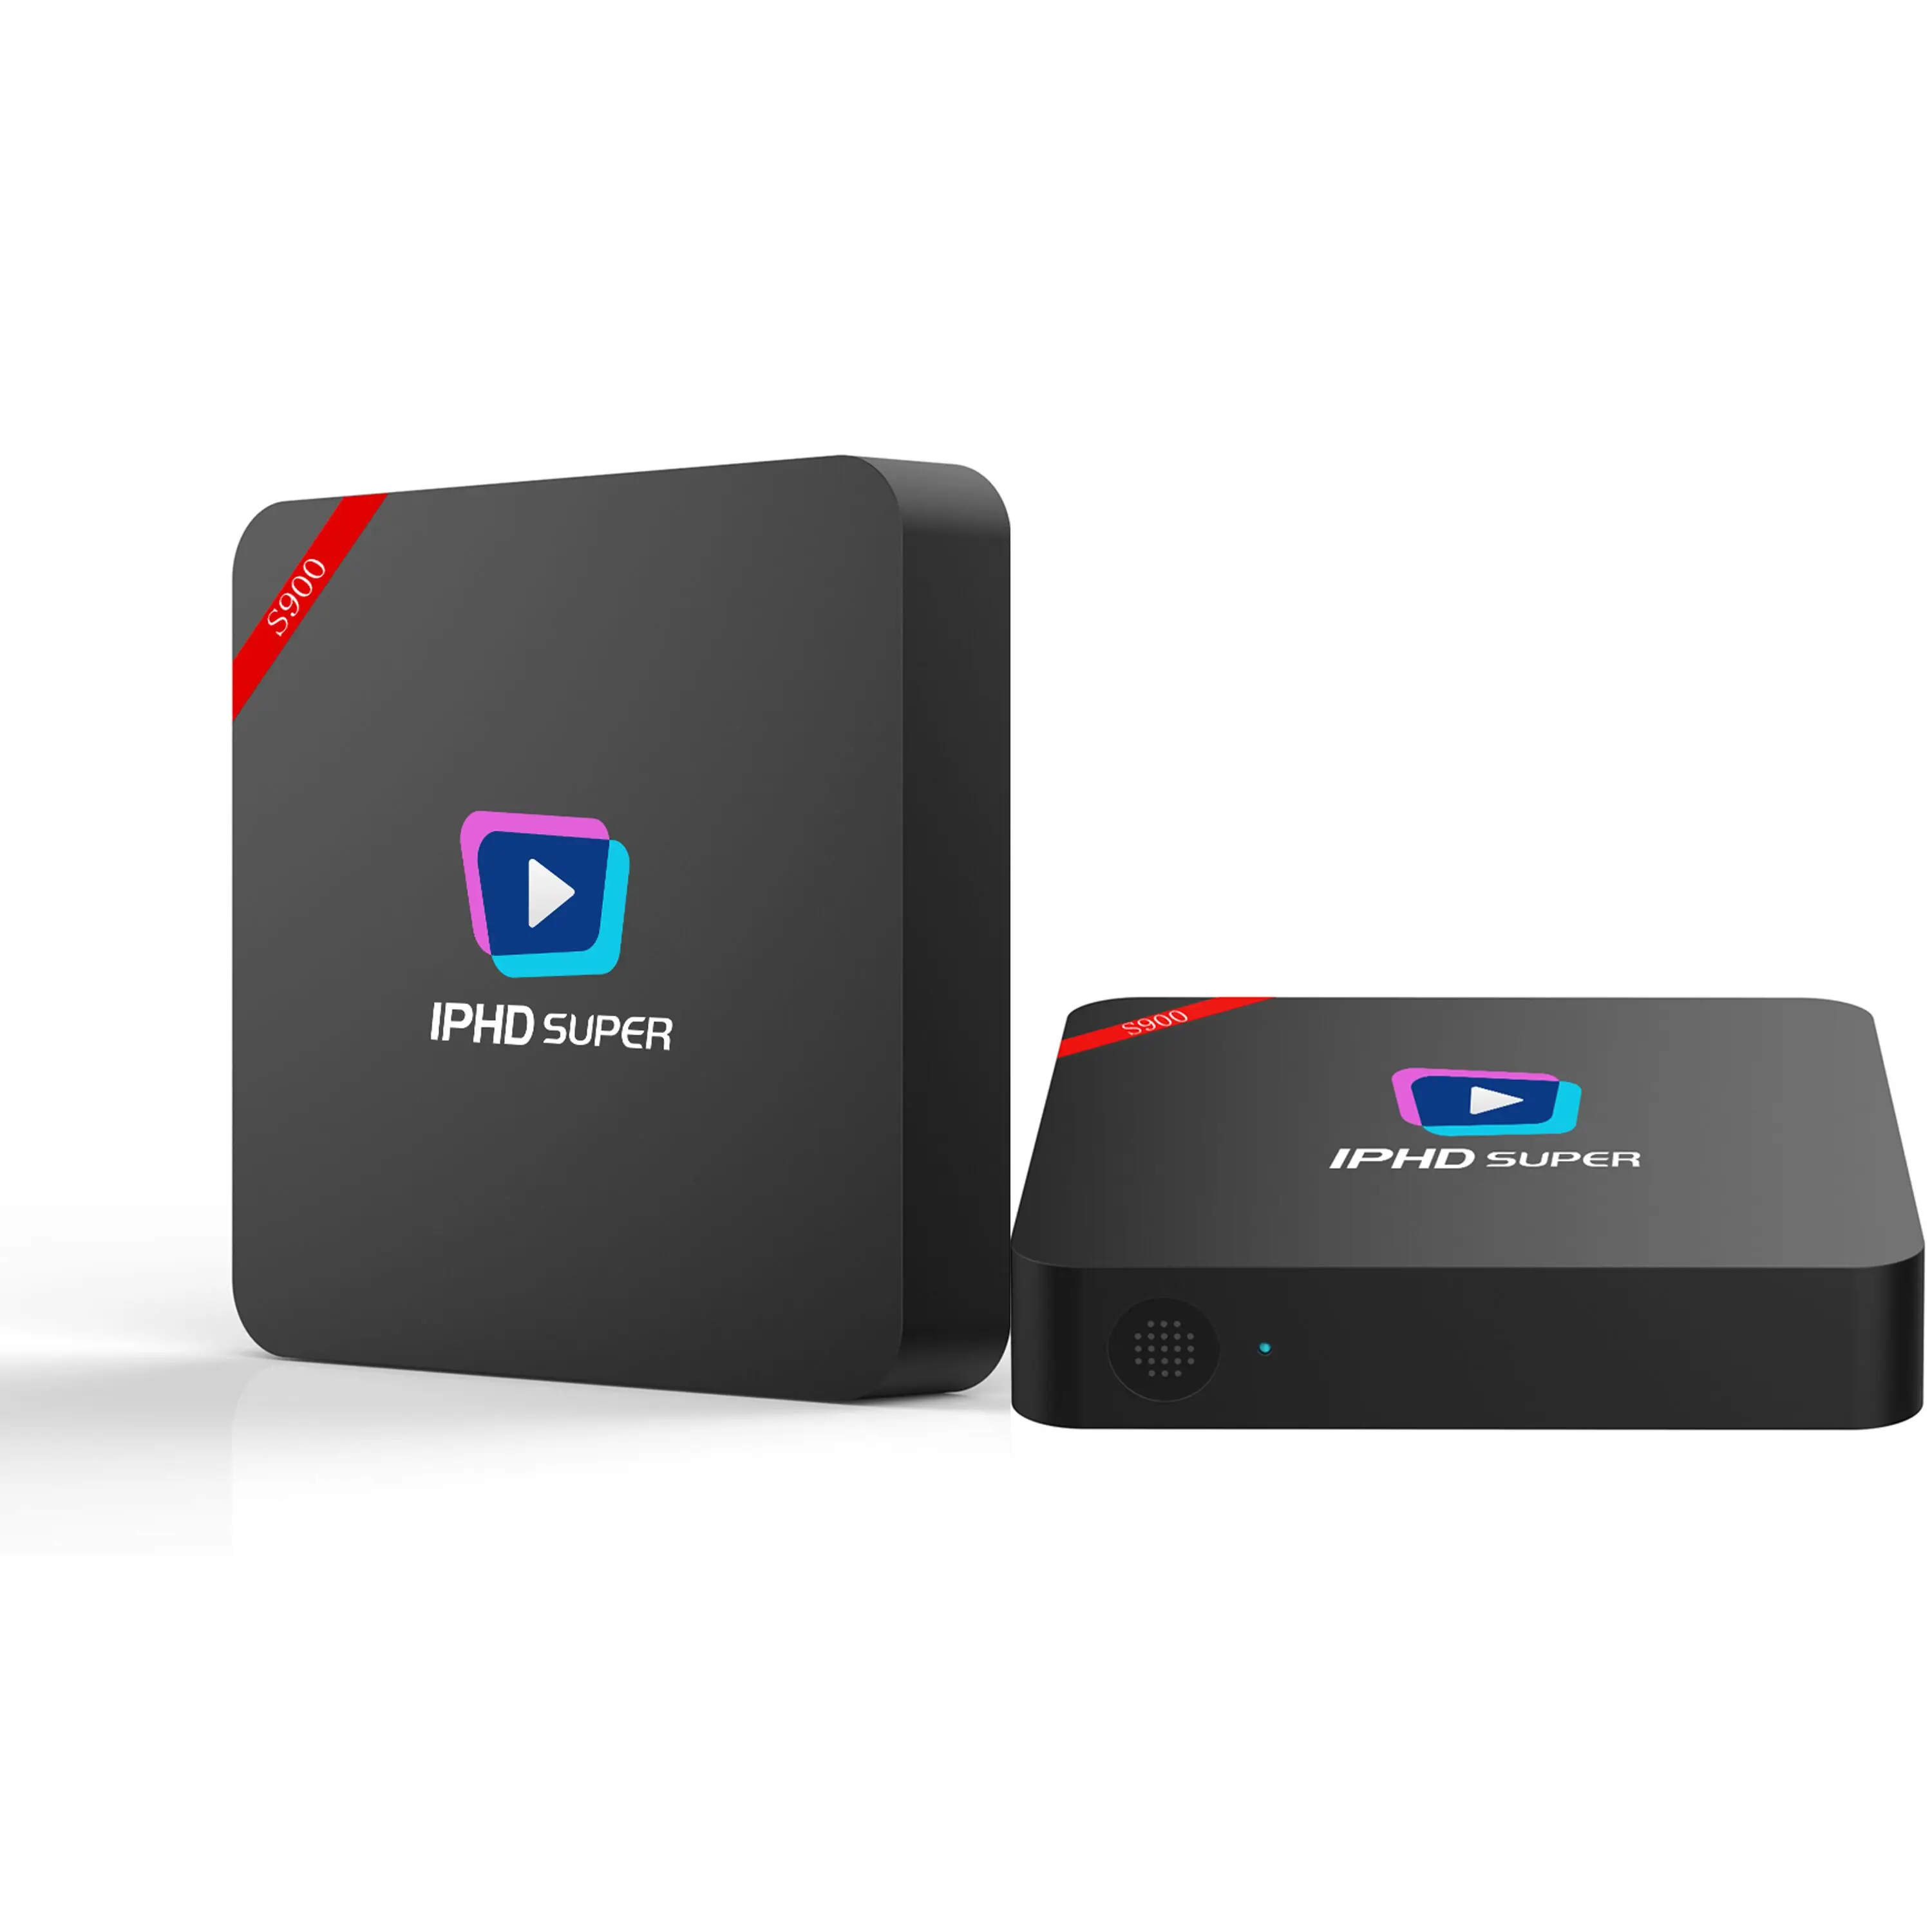 Alibaba.com / Hot seller IPTV Set Top Box with 2800+Live Channels/3000+VOD One Year Free Service Included iptv set top box